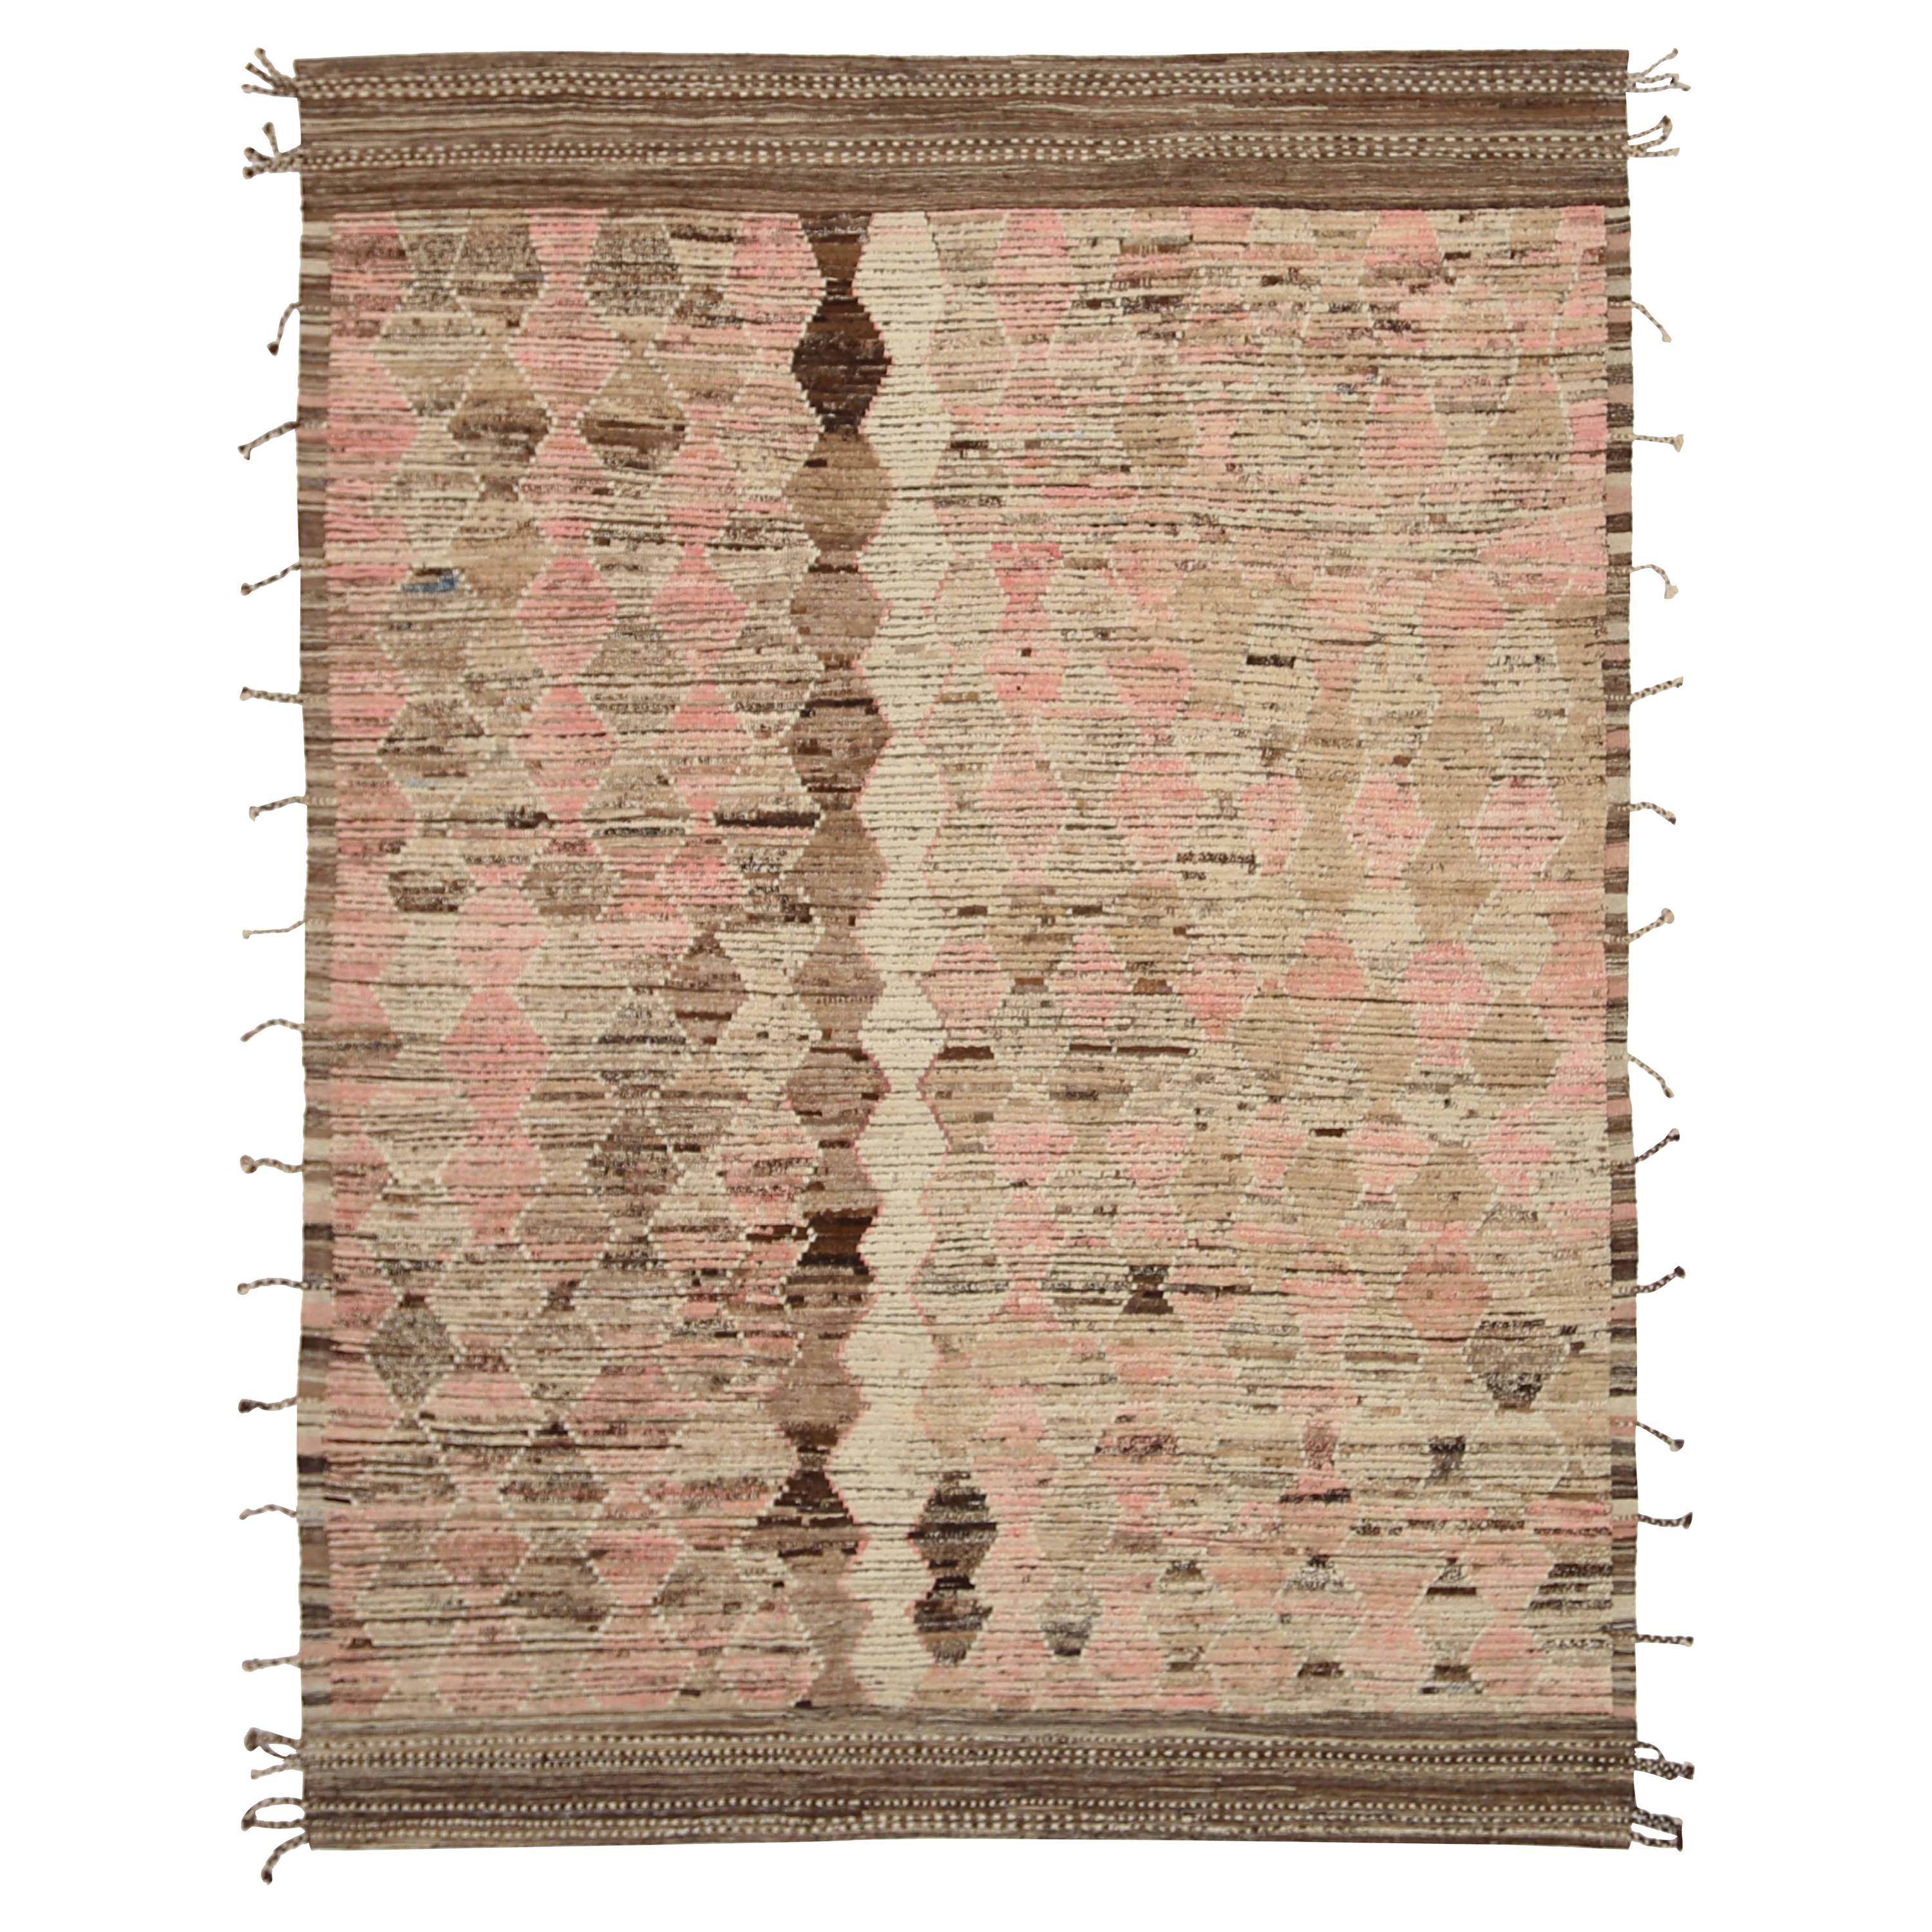 New Afghan Area Rug Moroccan Design For Sale